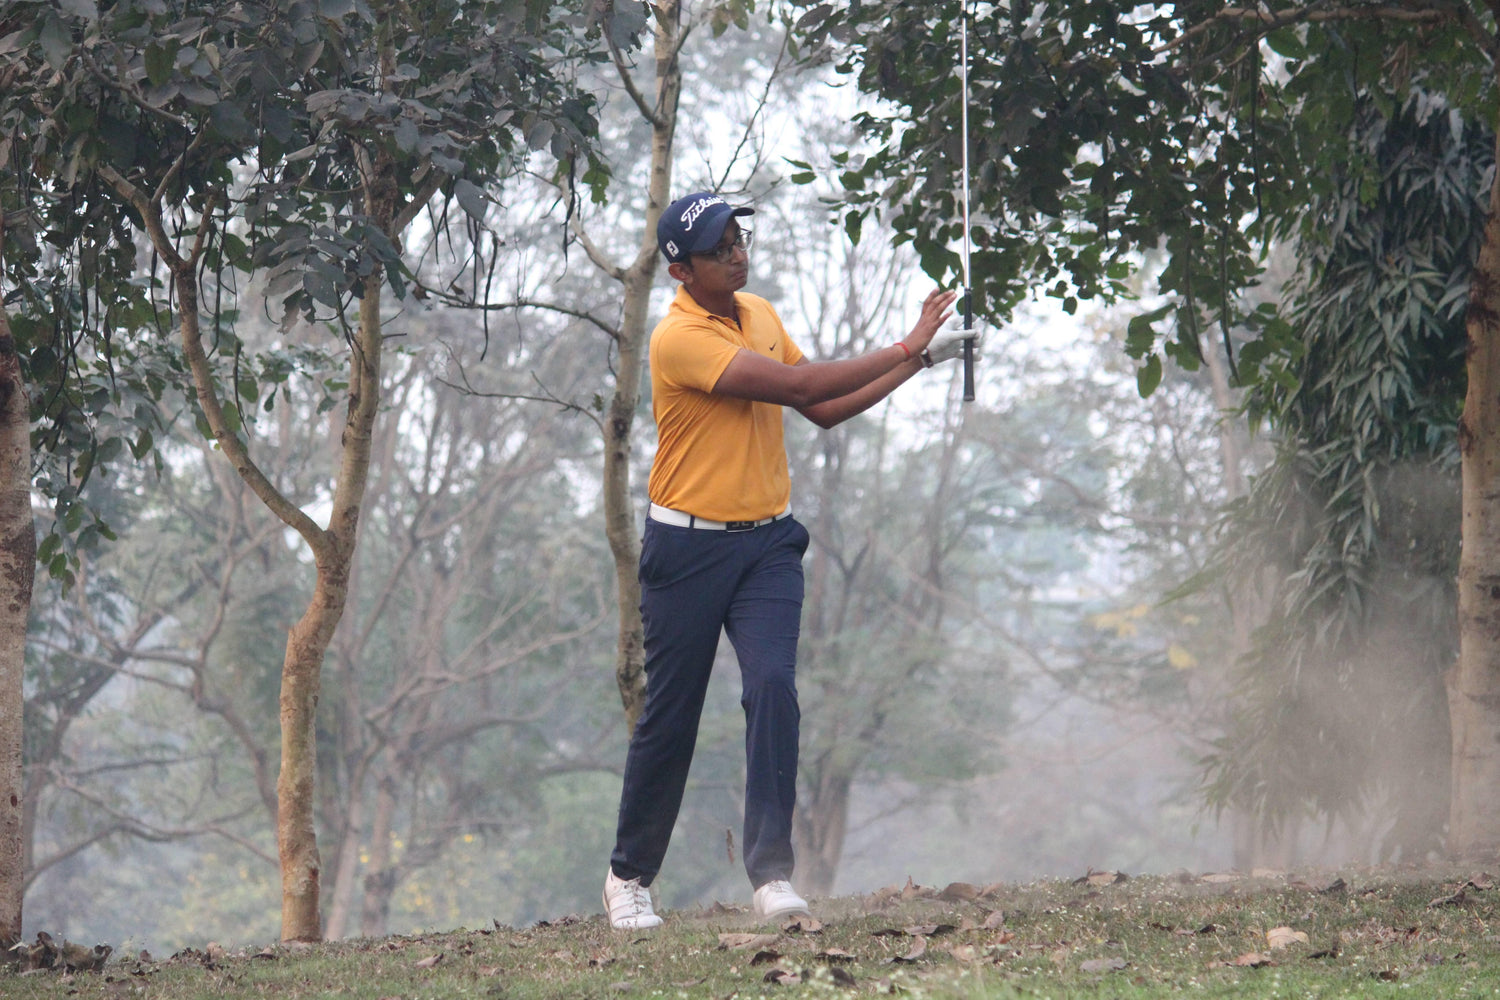 Amateurs Shaurya Sharma and Kritein Gandotra occupy the top two spots after first round of Pre Qualifying II In India | golfedge  | India’s Favourite Online Golf Store  | golfedgeindia.com